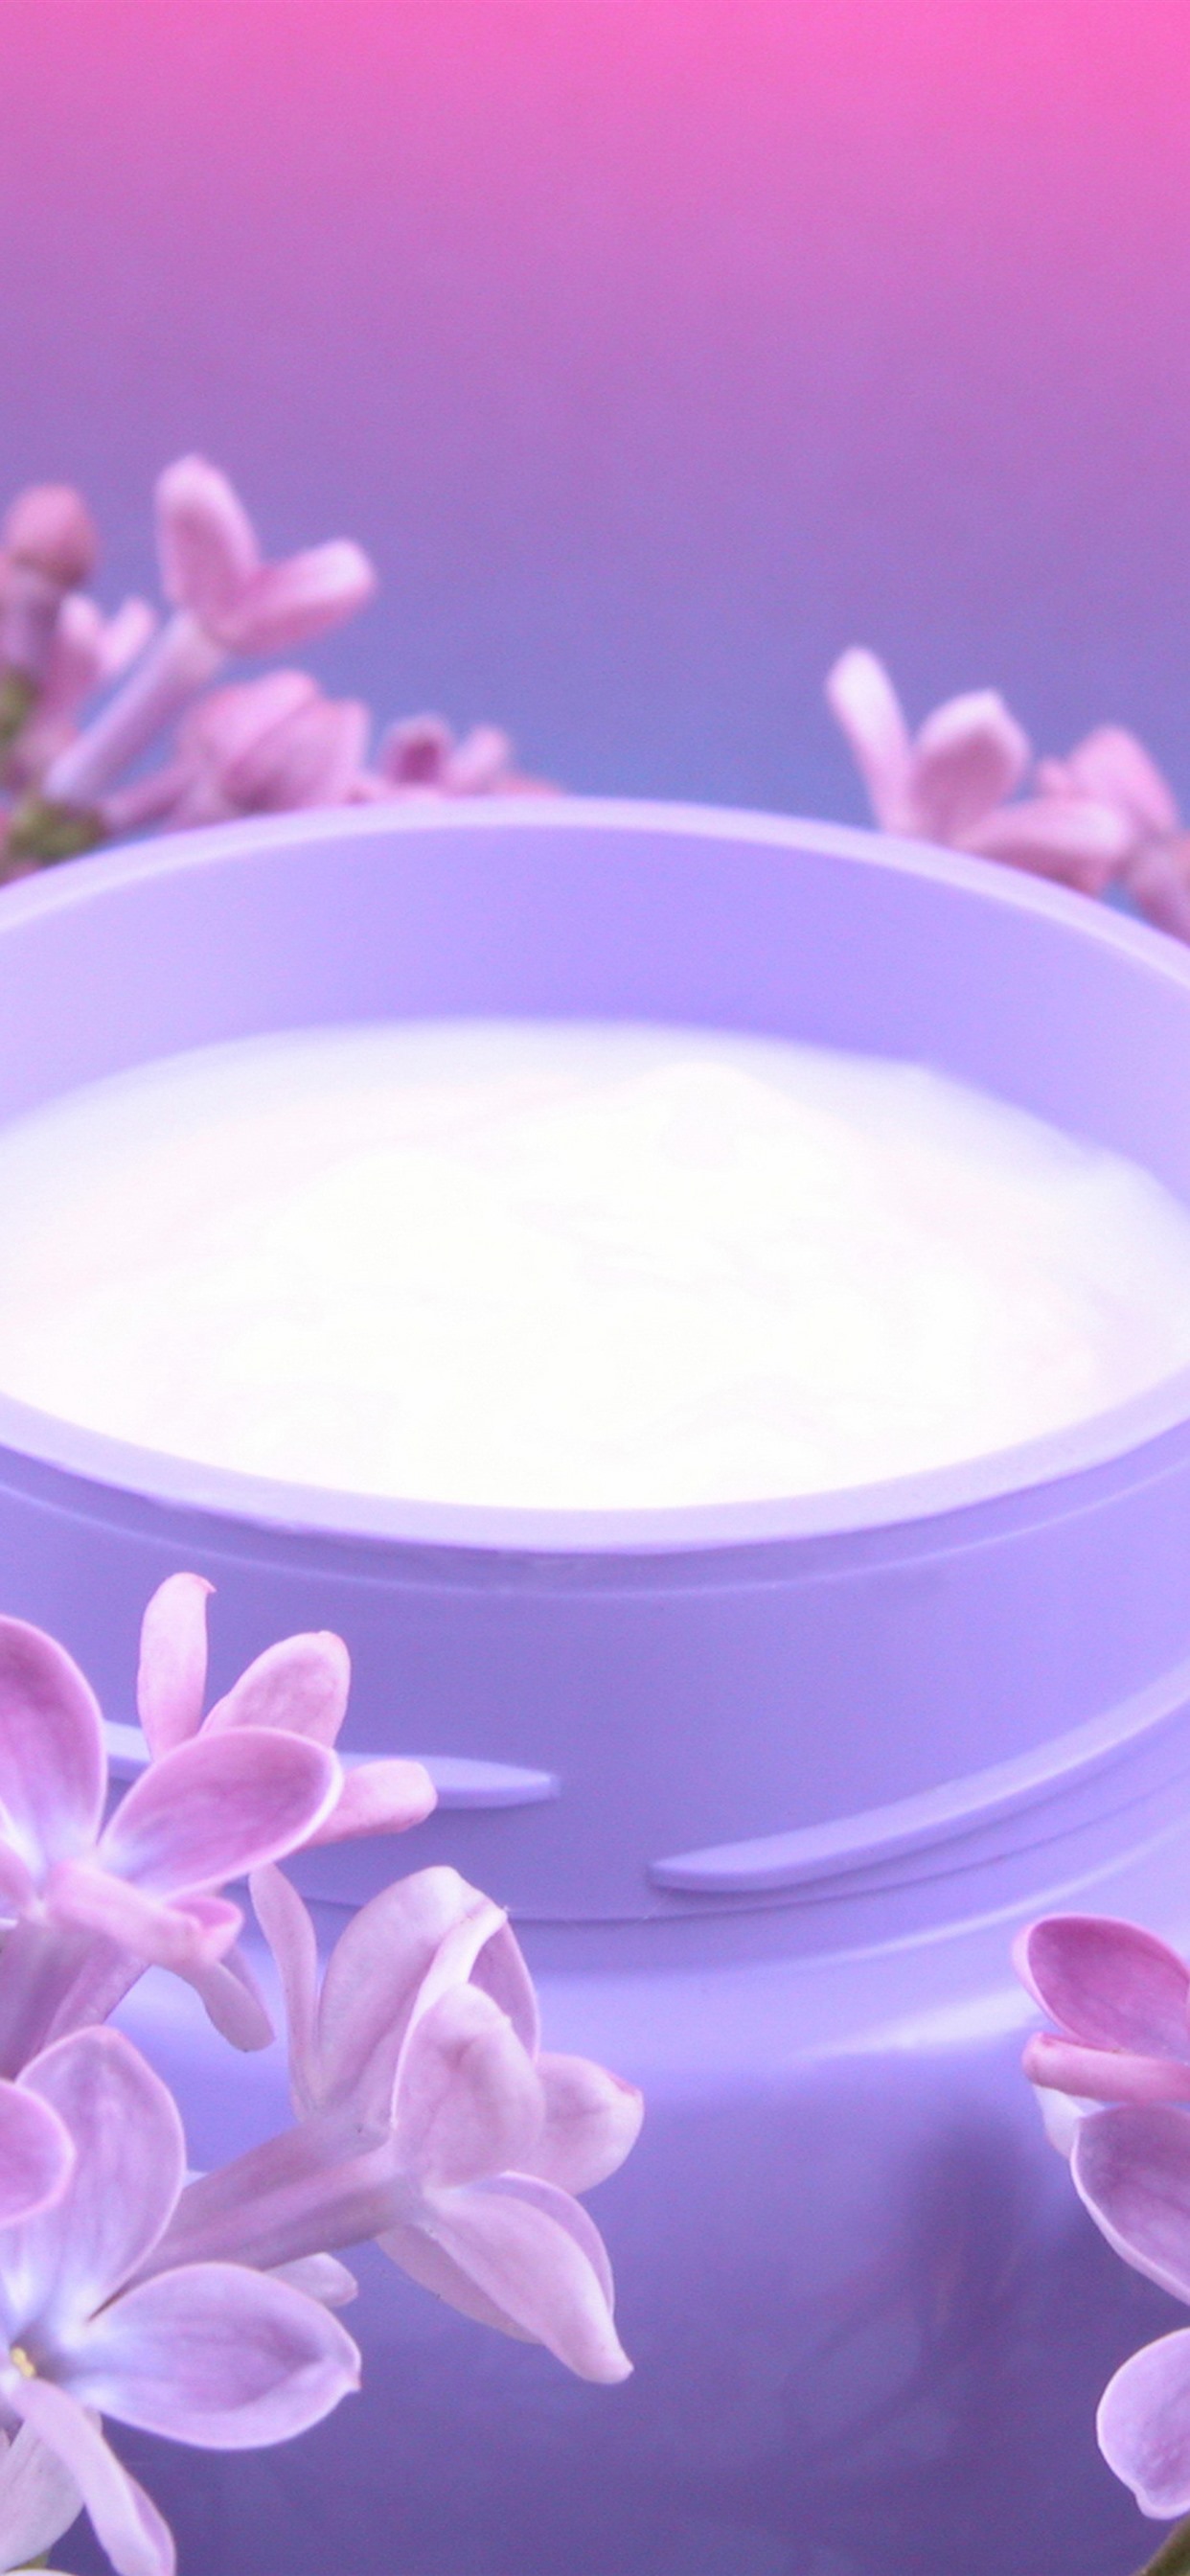 Lilac Flowers, Milk 1242x2688 IPhone 11 Pro XS Max Wallpaper, Background, Picture, Image